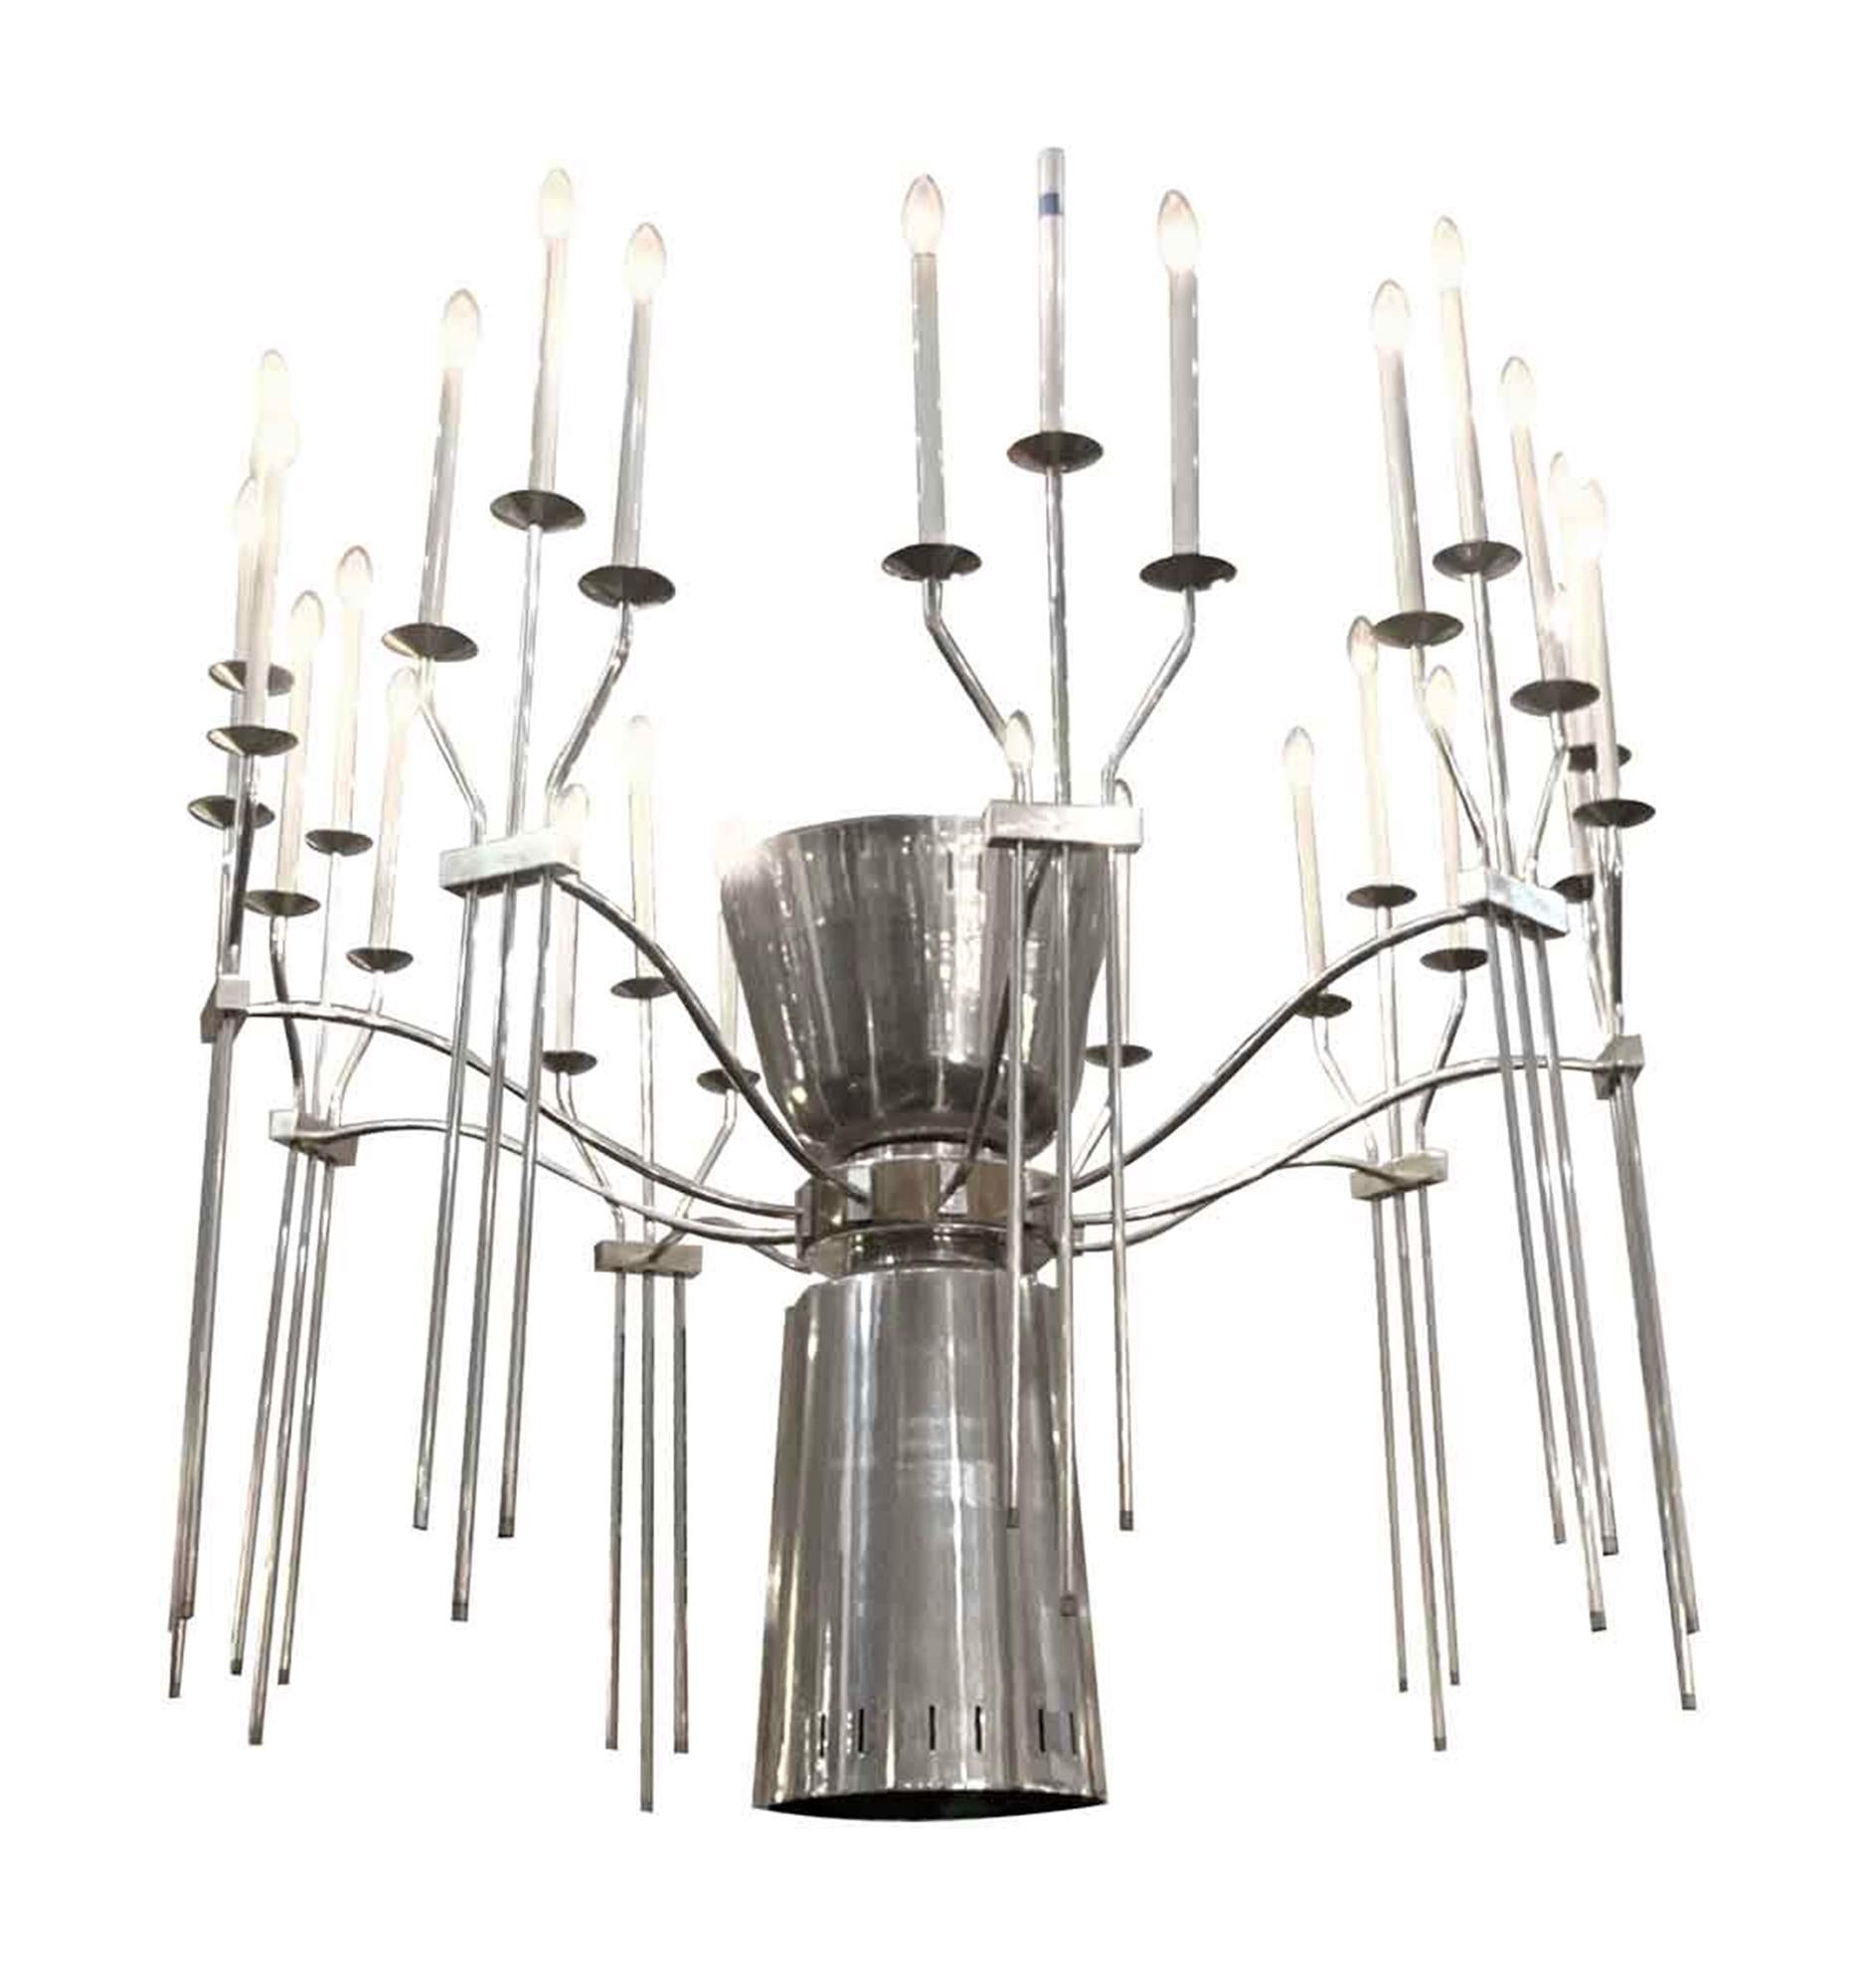 1960s Mid-Century Modern polished aluminum chandelier and brass accents. 27 candlestick lights with four flood lights in the center body - one single light that shines down and three lights that shine upwards. Includes long pole. We have small